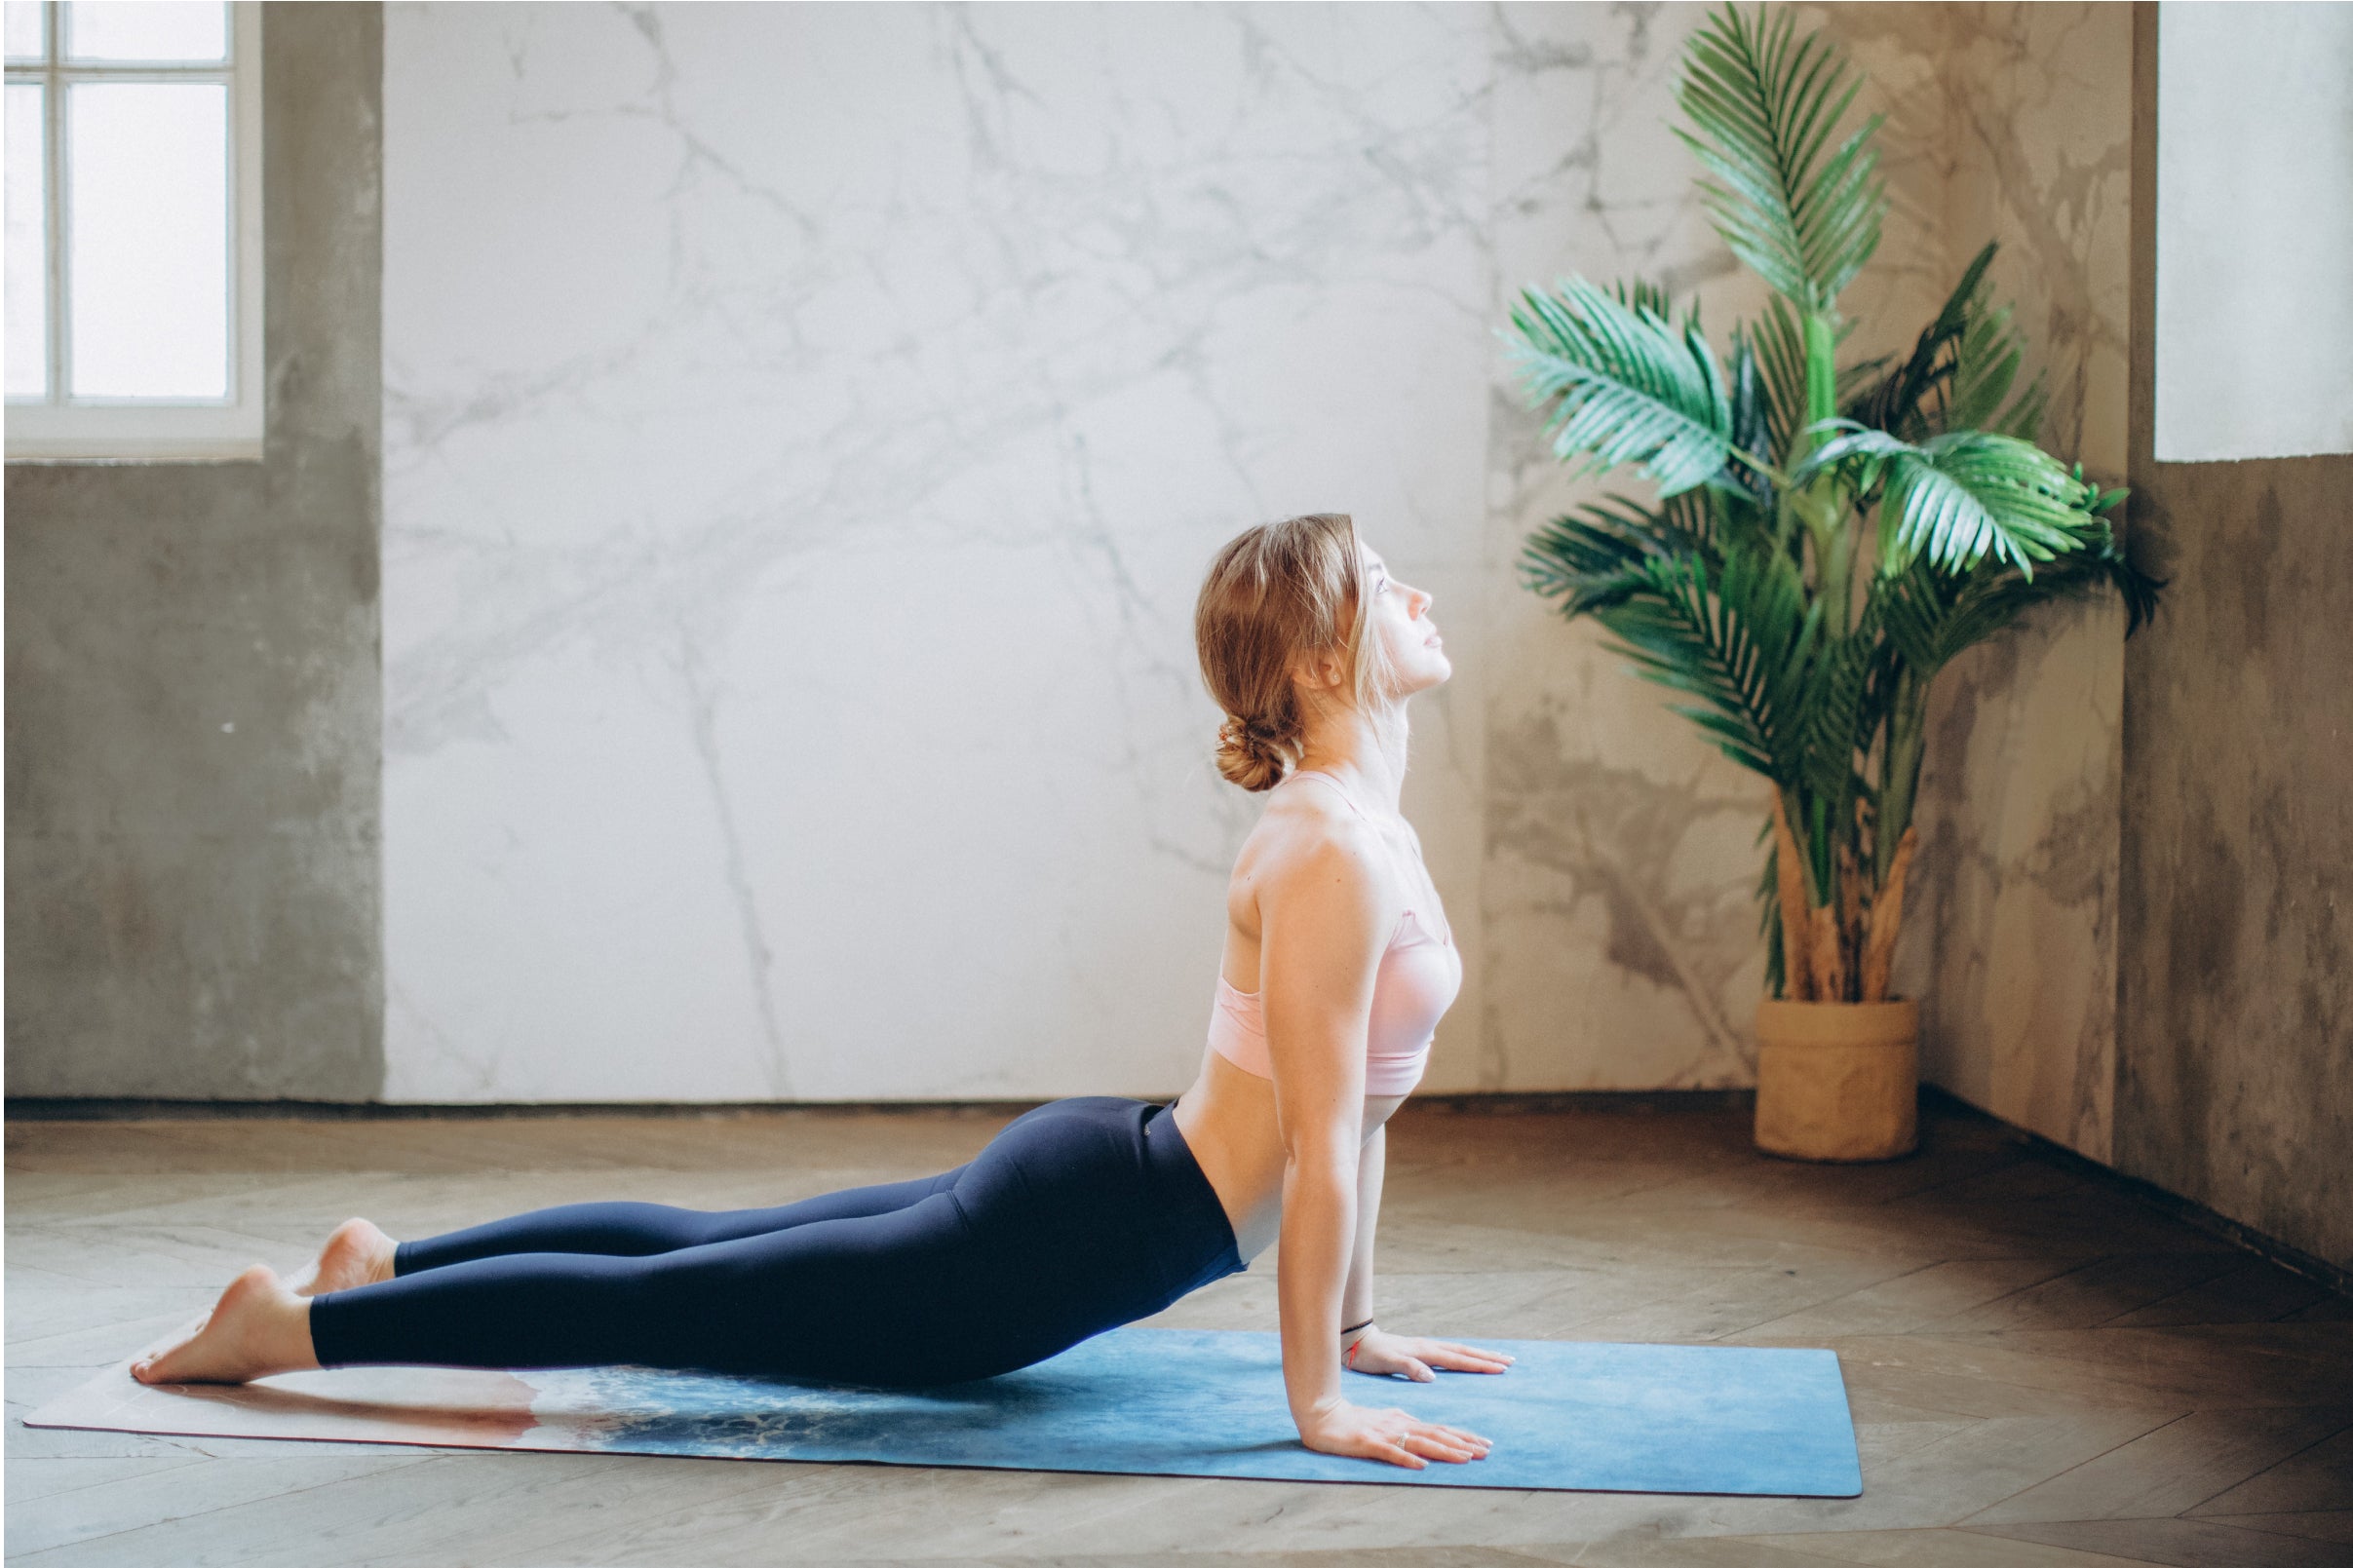 Josh Summers' Yin Yoga Poses That Build Strong, Healthy Qi